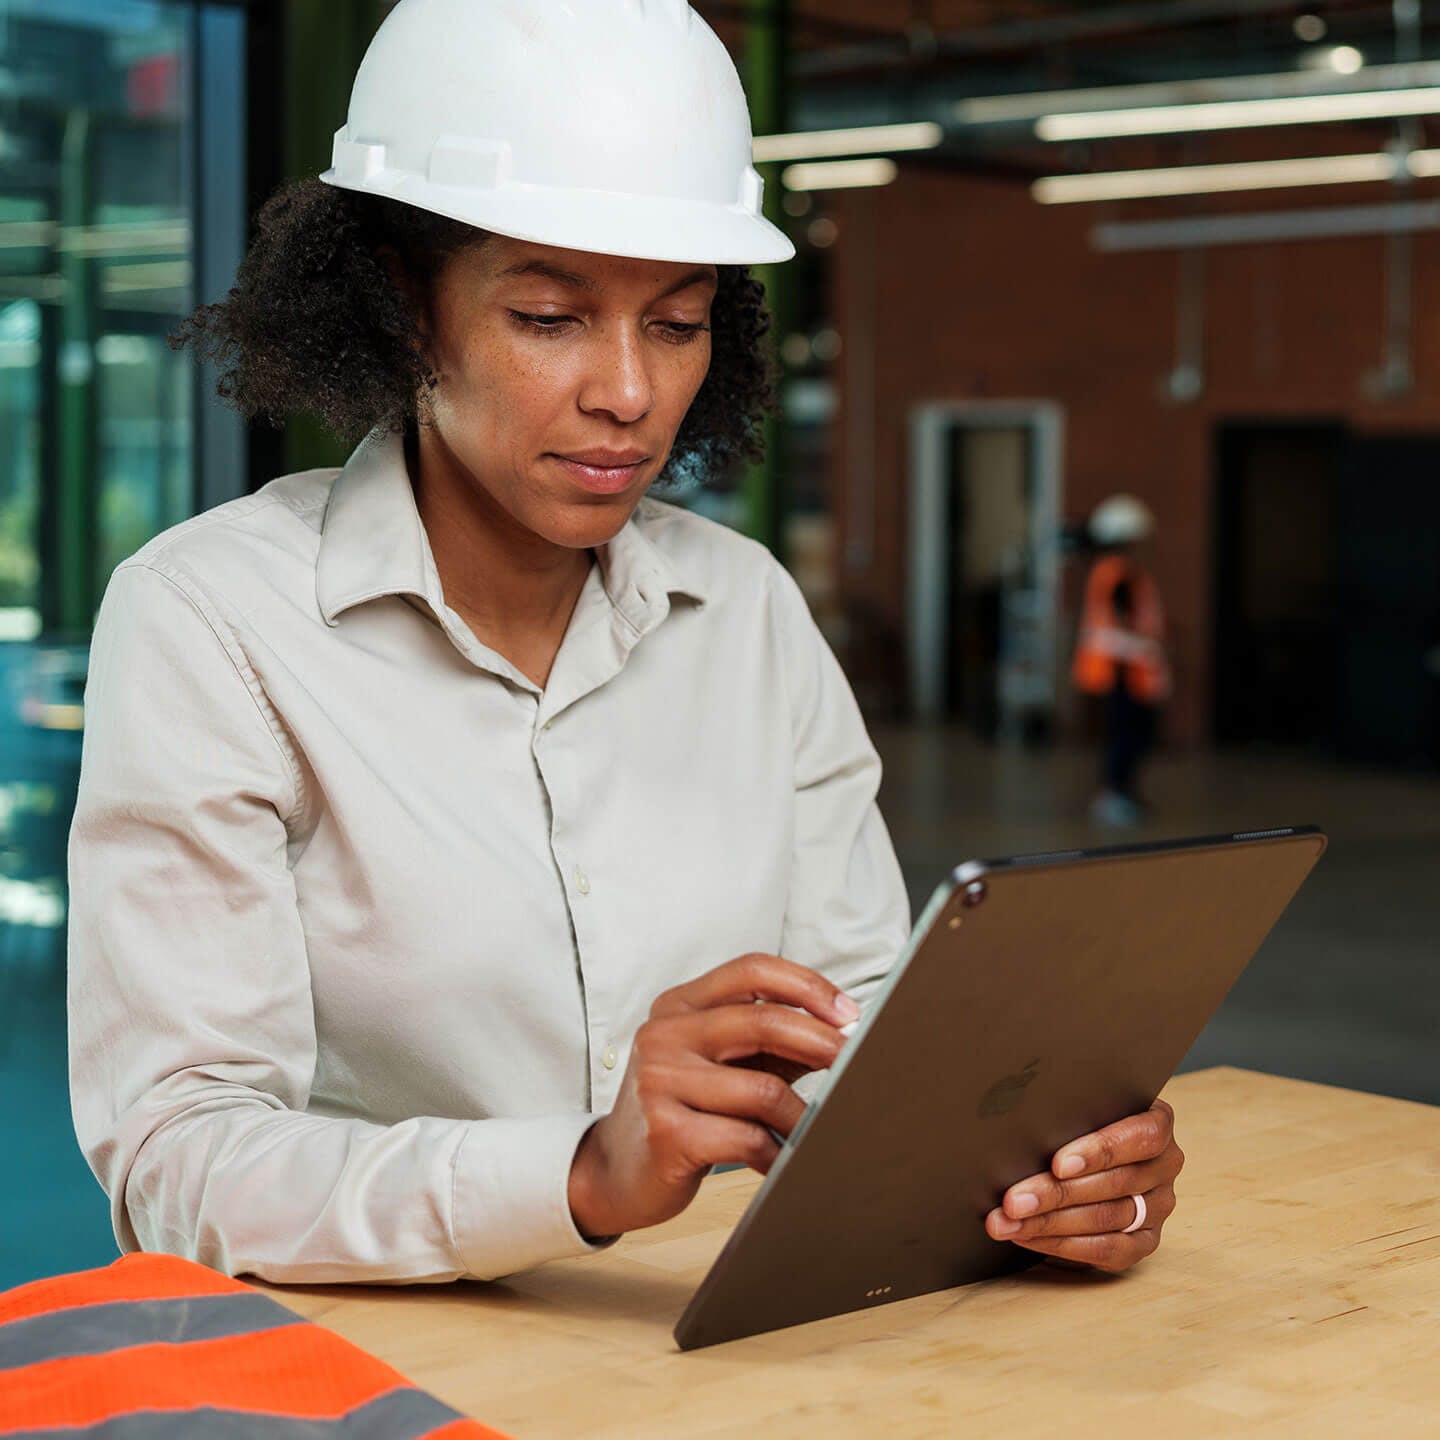 person standing at desk with hard hat using a tablet